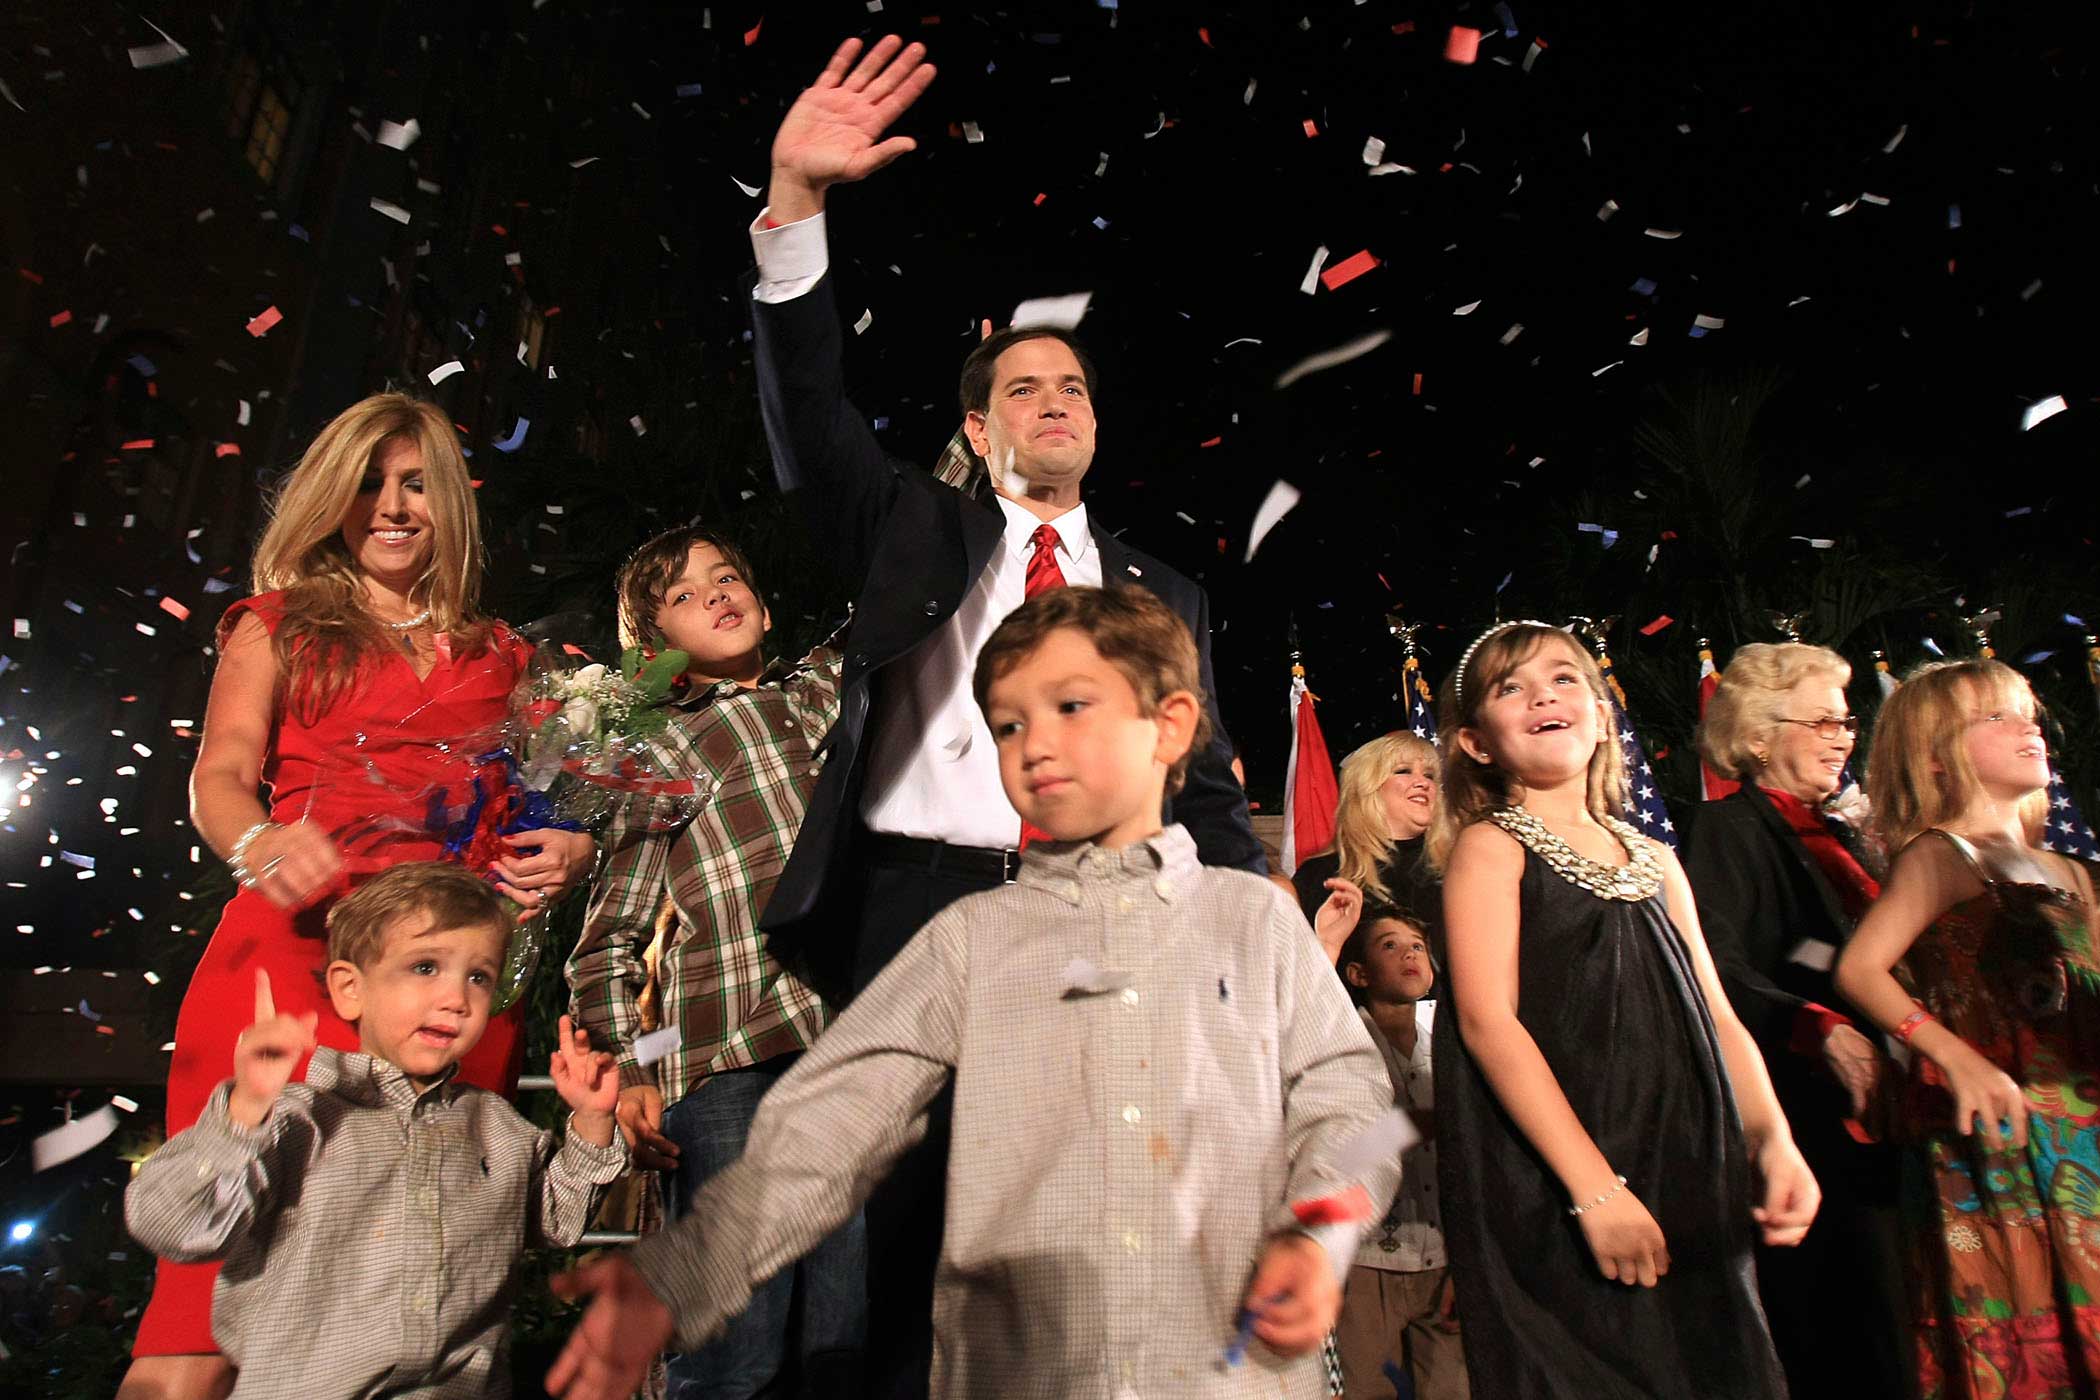 Then Florida Republican U.S. Senate nominee Marco Rubio celebrates with his family after winning the election on Nov. 2, 2010, in Coral Gables, Fla.